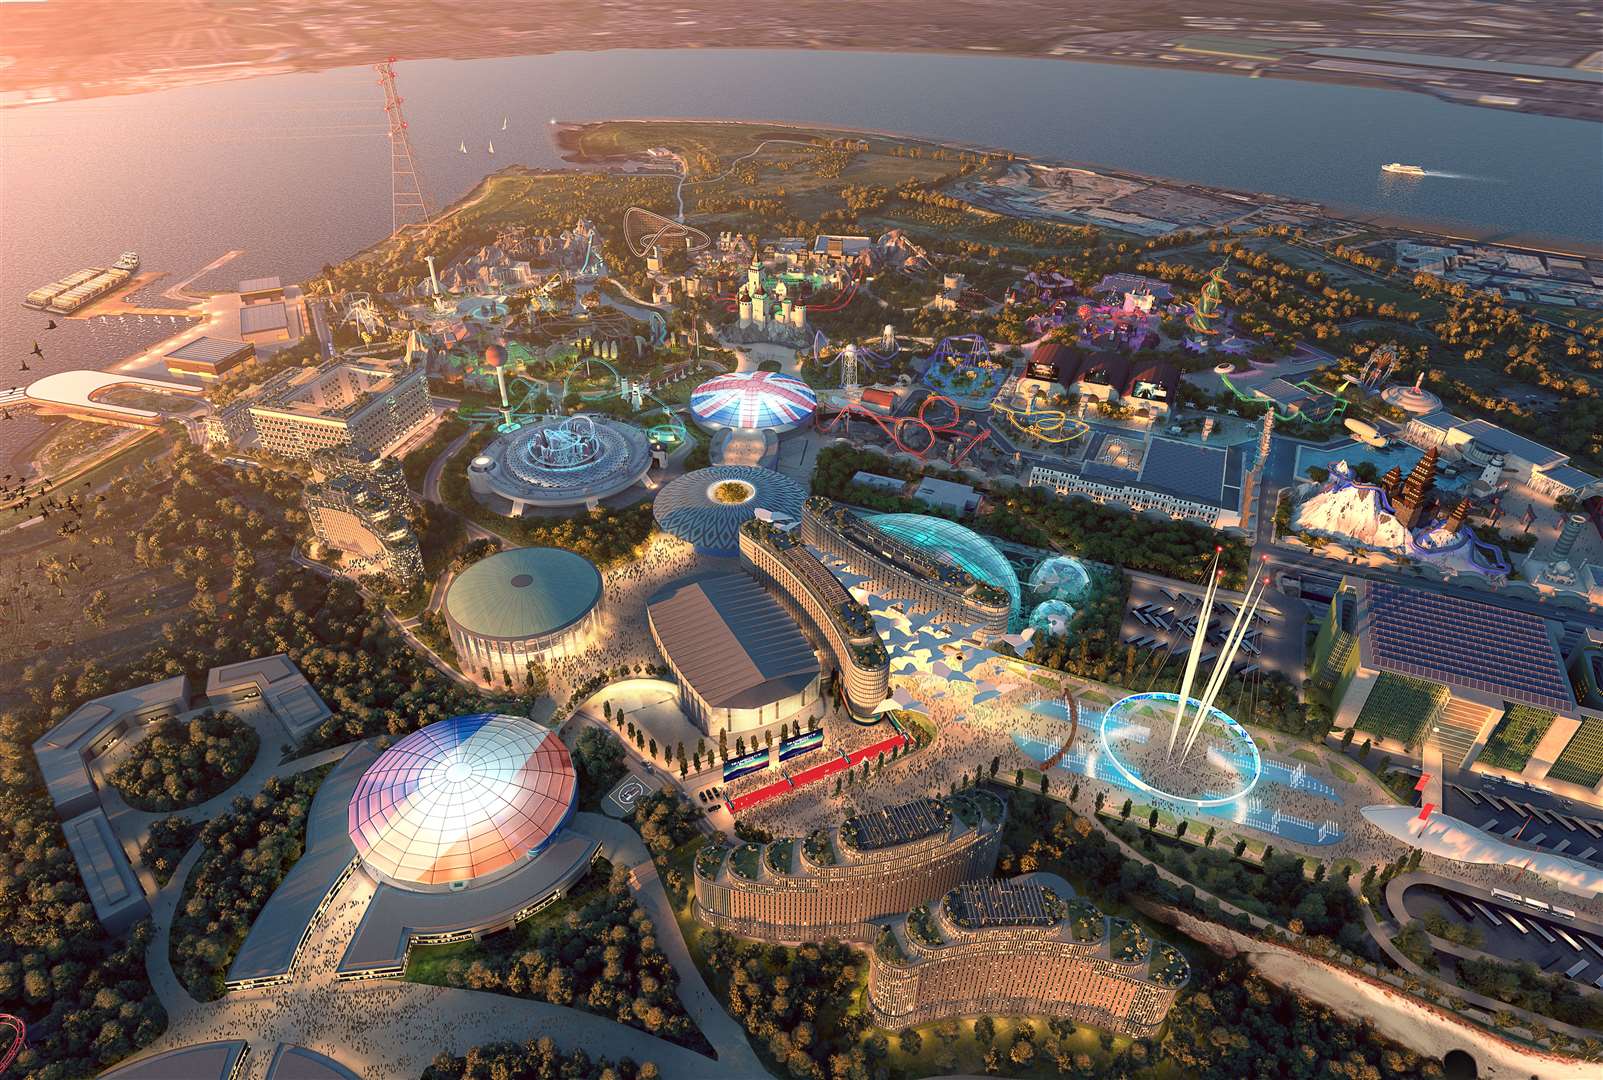 A CGI of what the London Resort theme park was projected to look like. Photo: London Resort